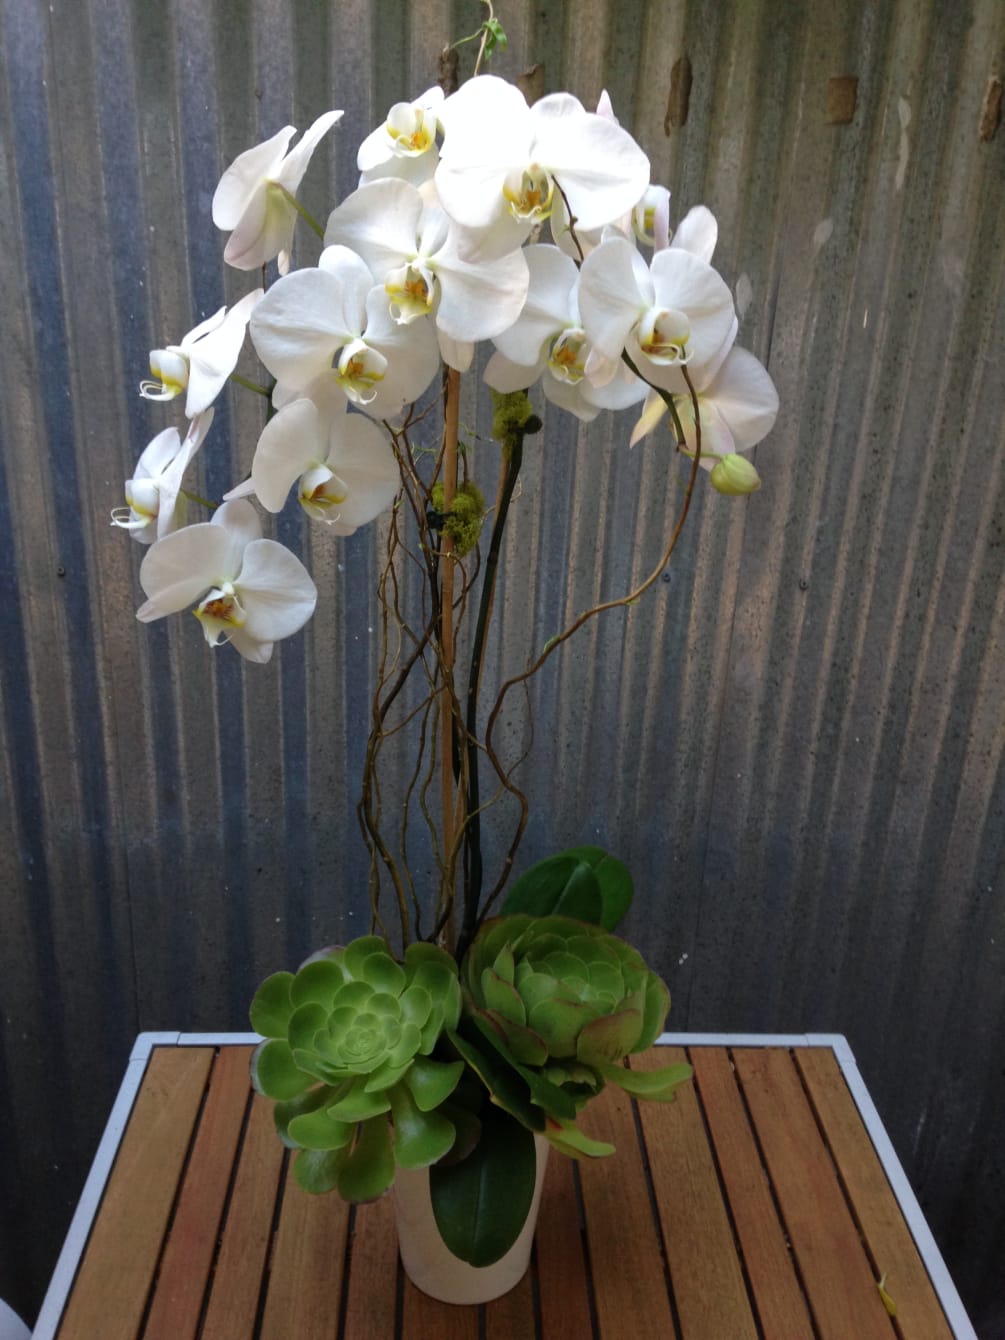 This beautiful Phalaenopsis orchid is paired with over-sized succulents in a white